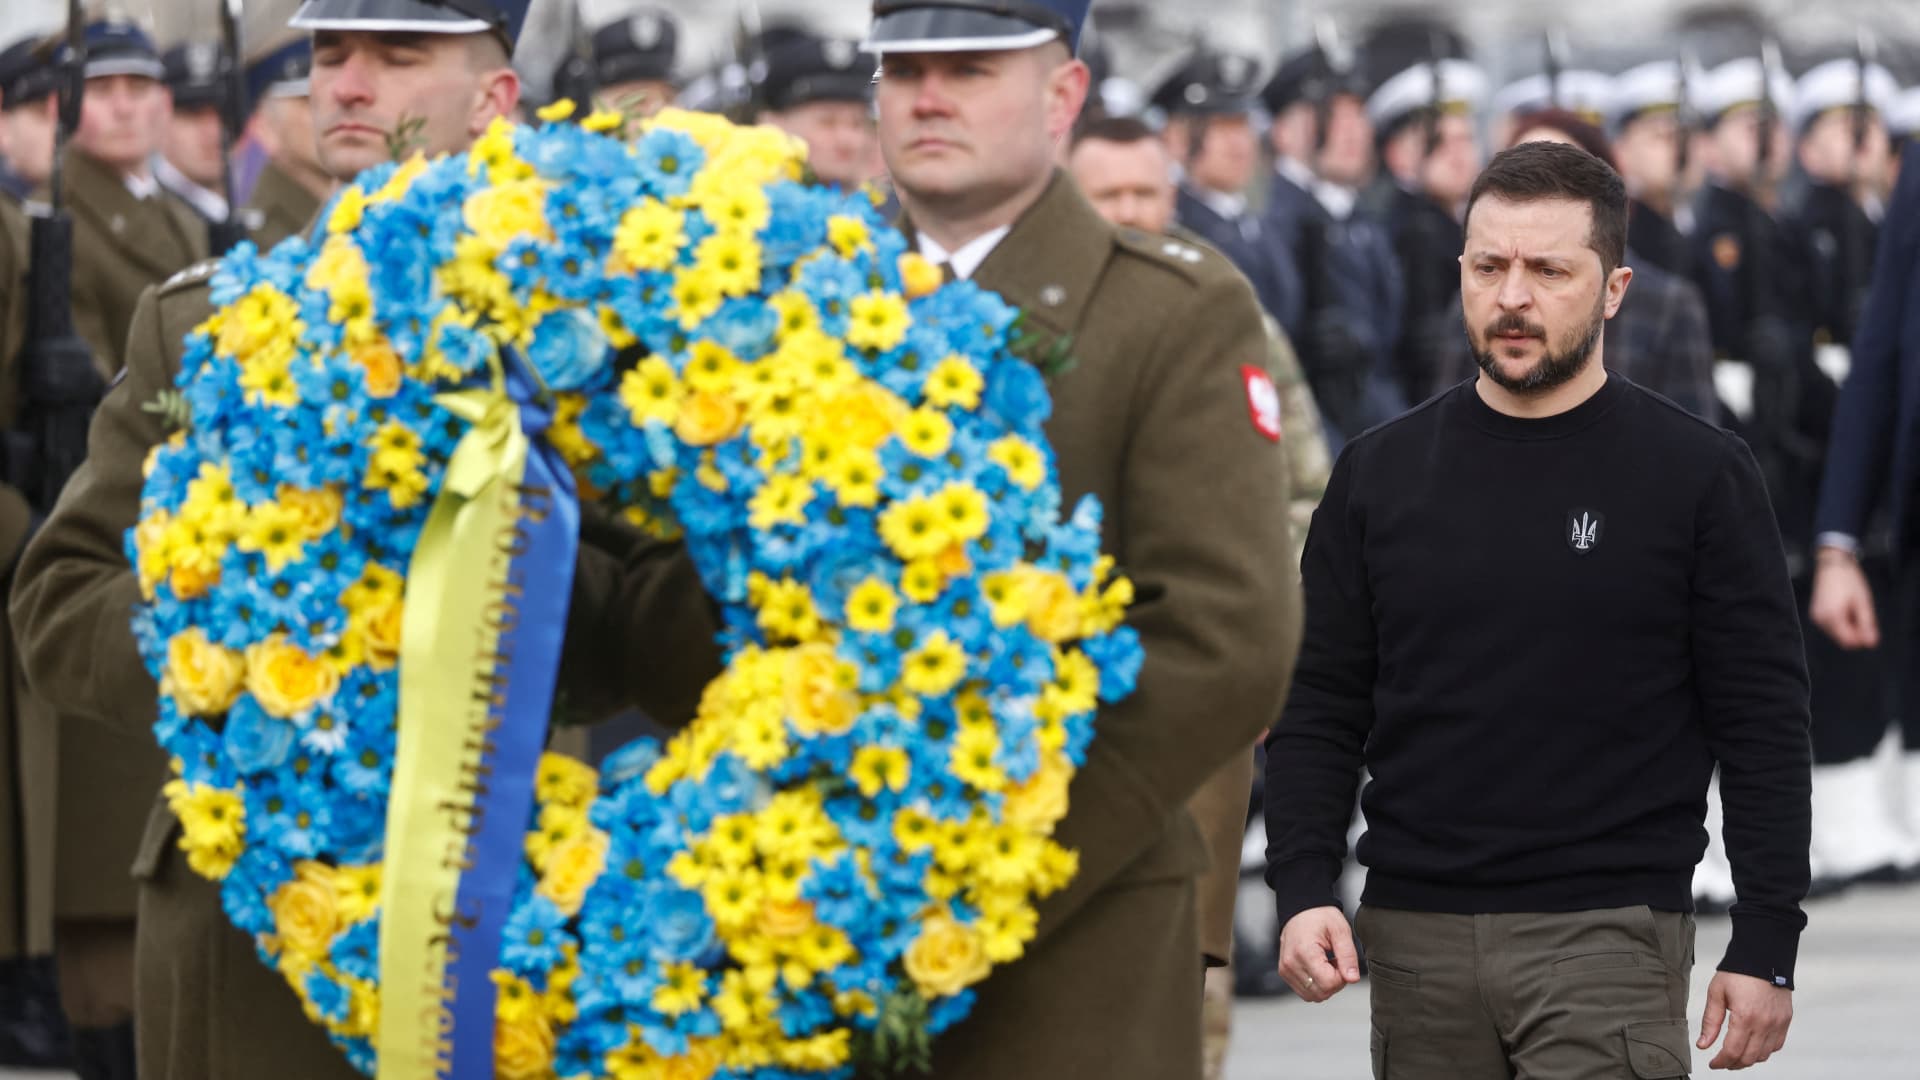 Ukrainian President Volodymyr Zelensky pays his respects during a wreath-laying ceremony at The Tomb of the Unknown Soldier in Warsaw, Poland, on April 5, 2023. 